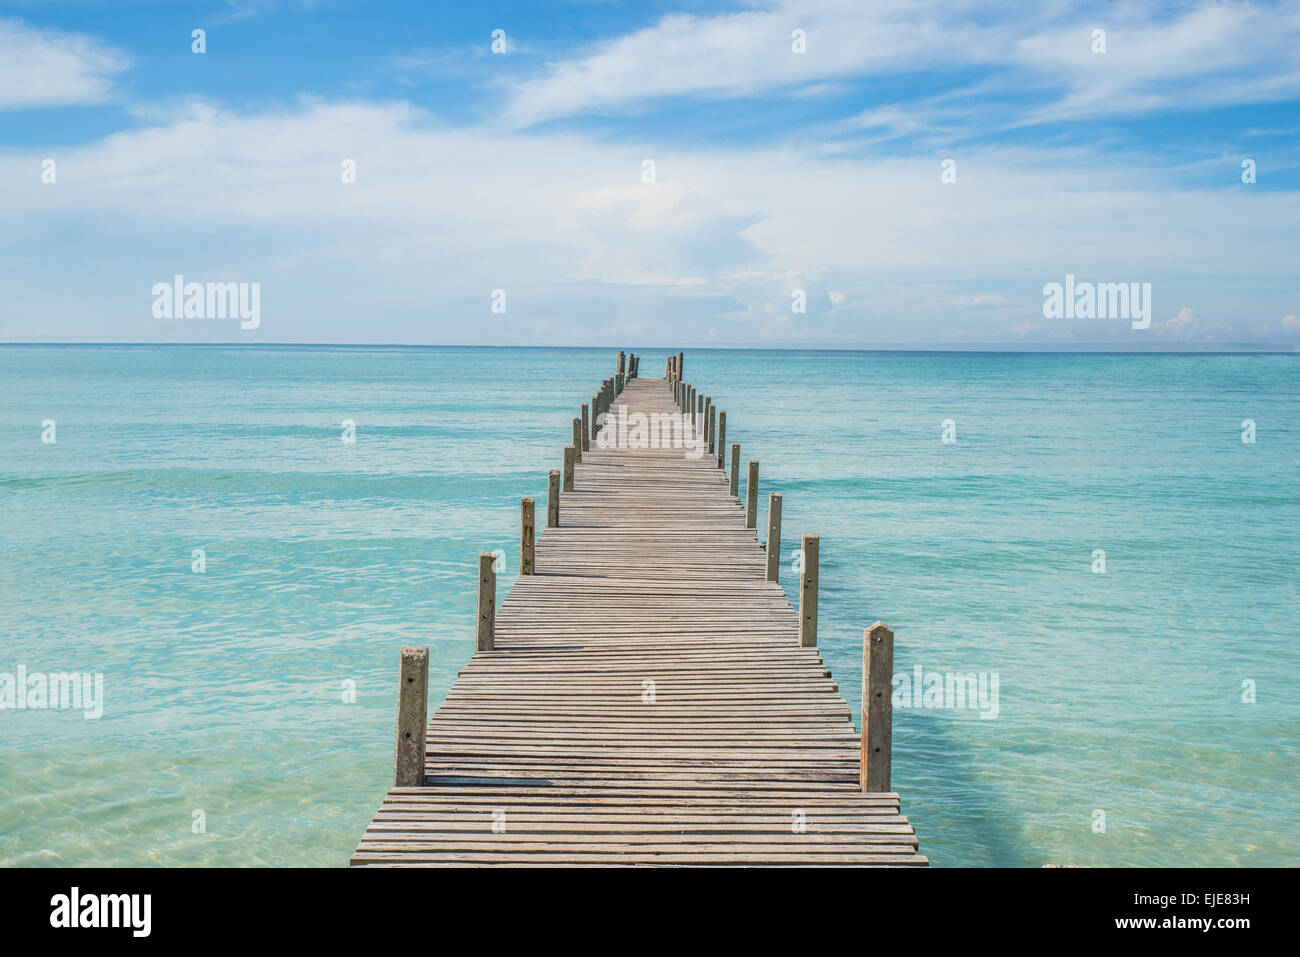 Summer, Travel, Vacation and Holiday concept - Wooden pier in Phuket, Thailand Stock Photo